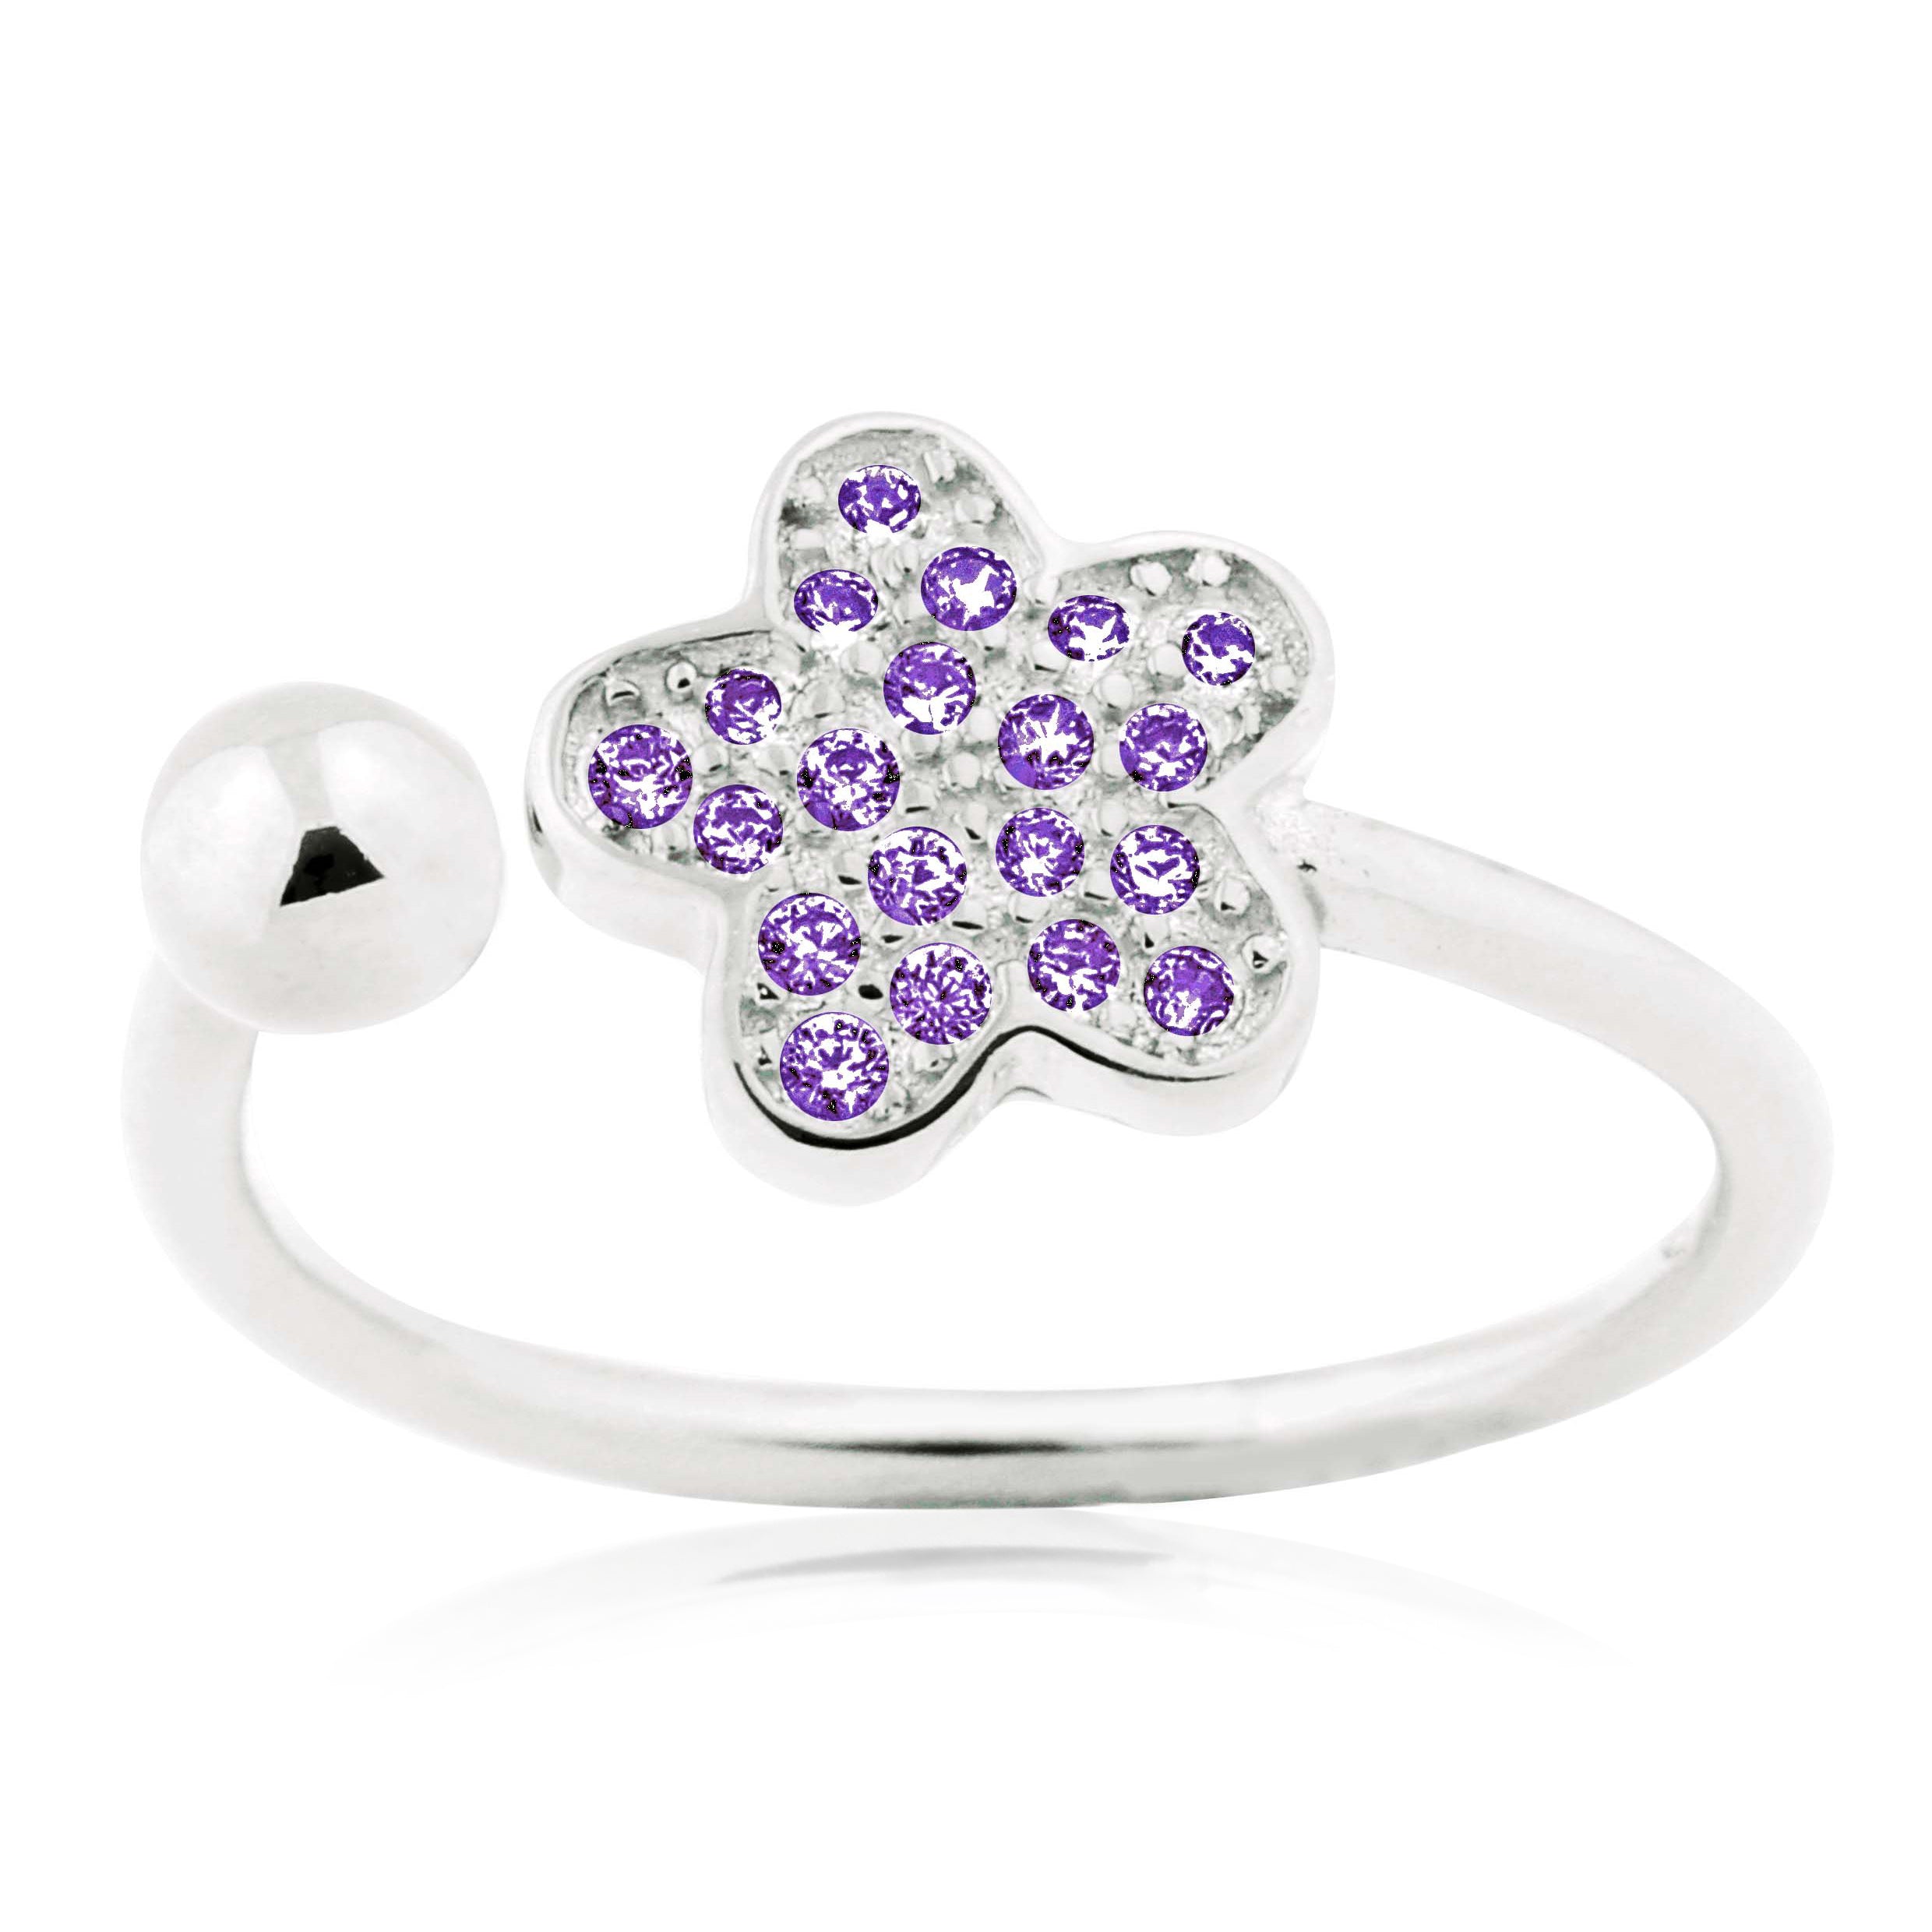 Adjustable Flower Ring in Sterling Silver Pavé with CZ